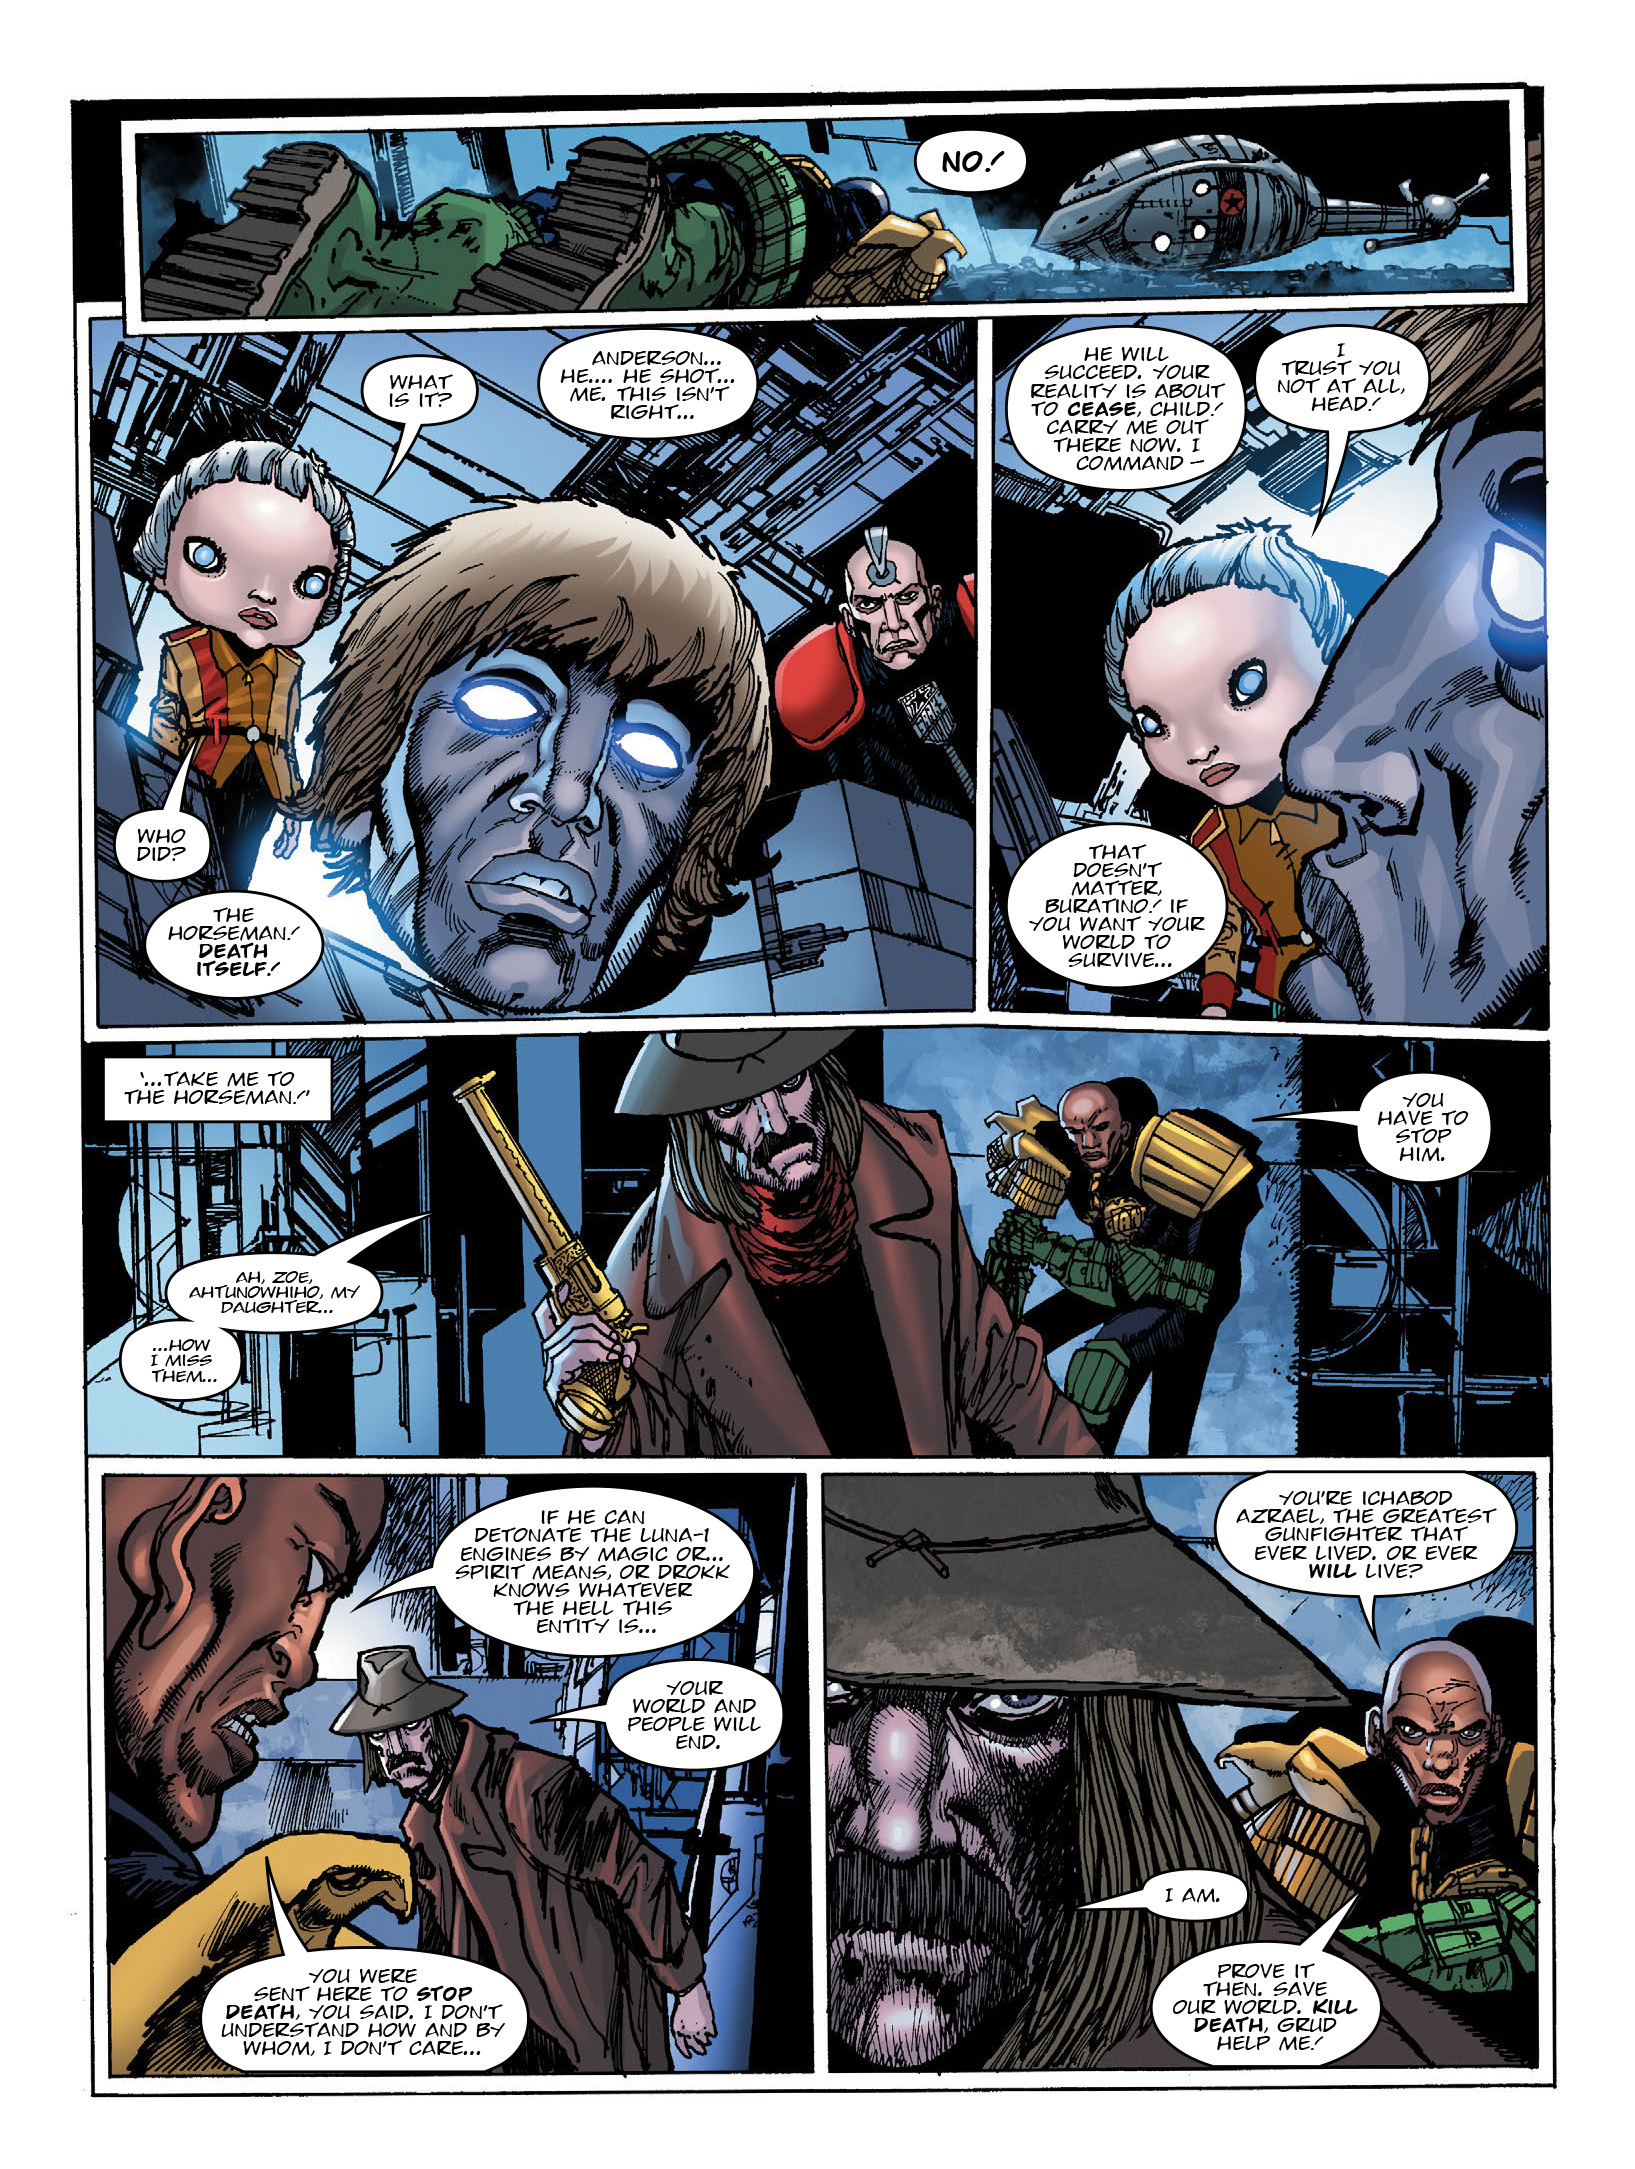 2000 AD: Chapter 2198 - Page 5